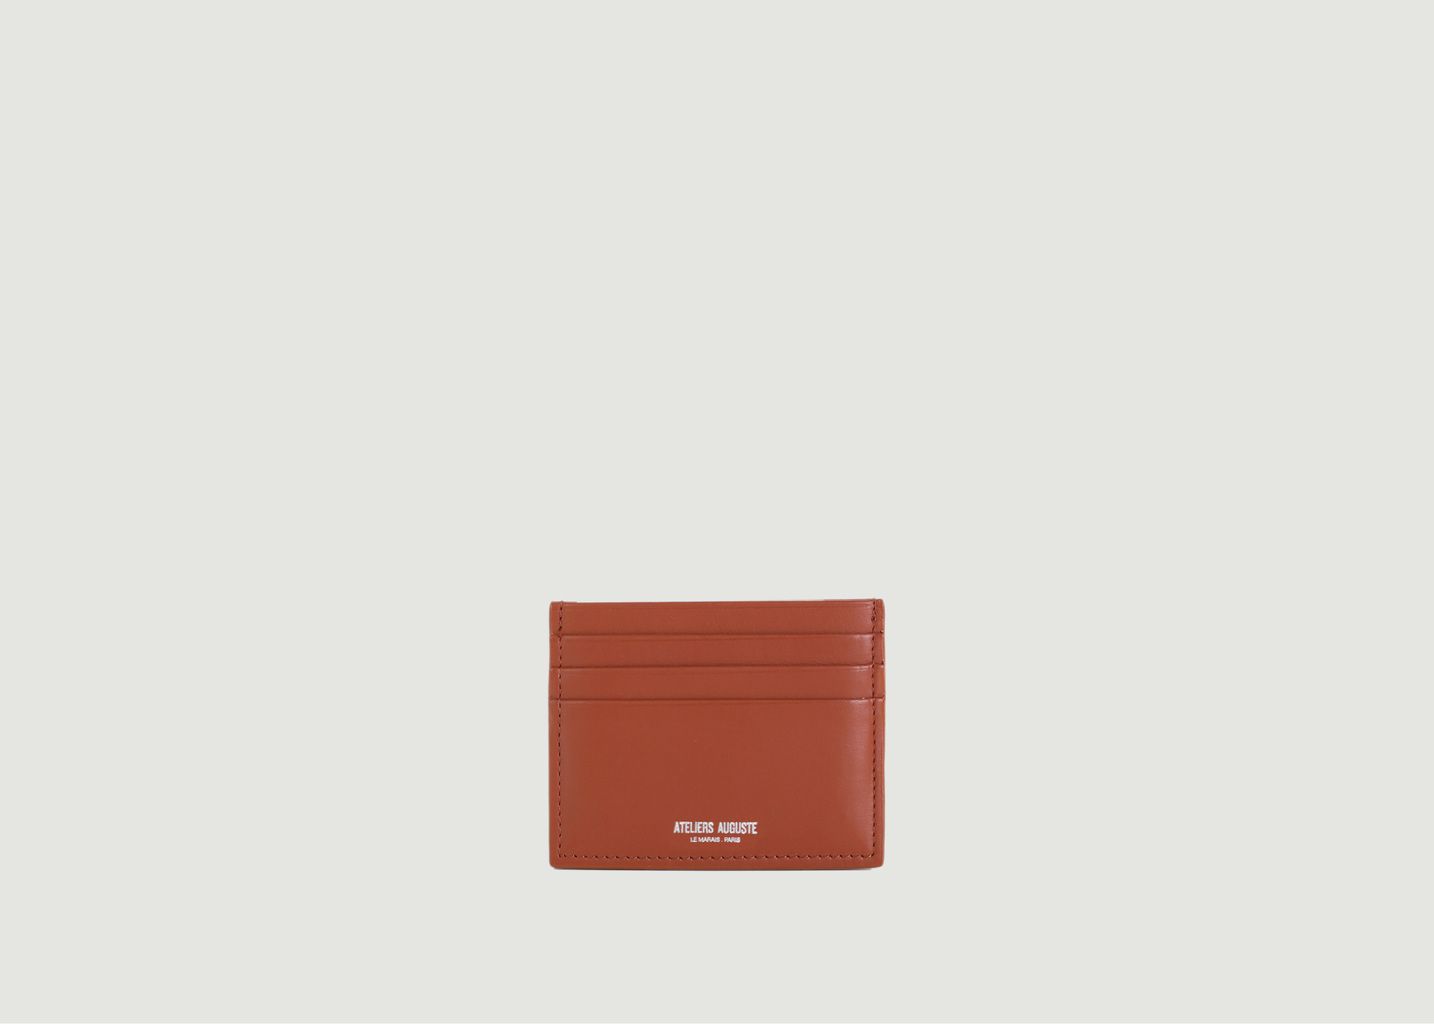 Grand Bouloi smooth leather card case - Ateliers Auguste